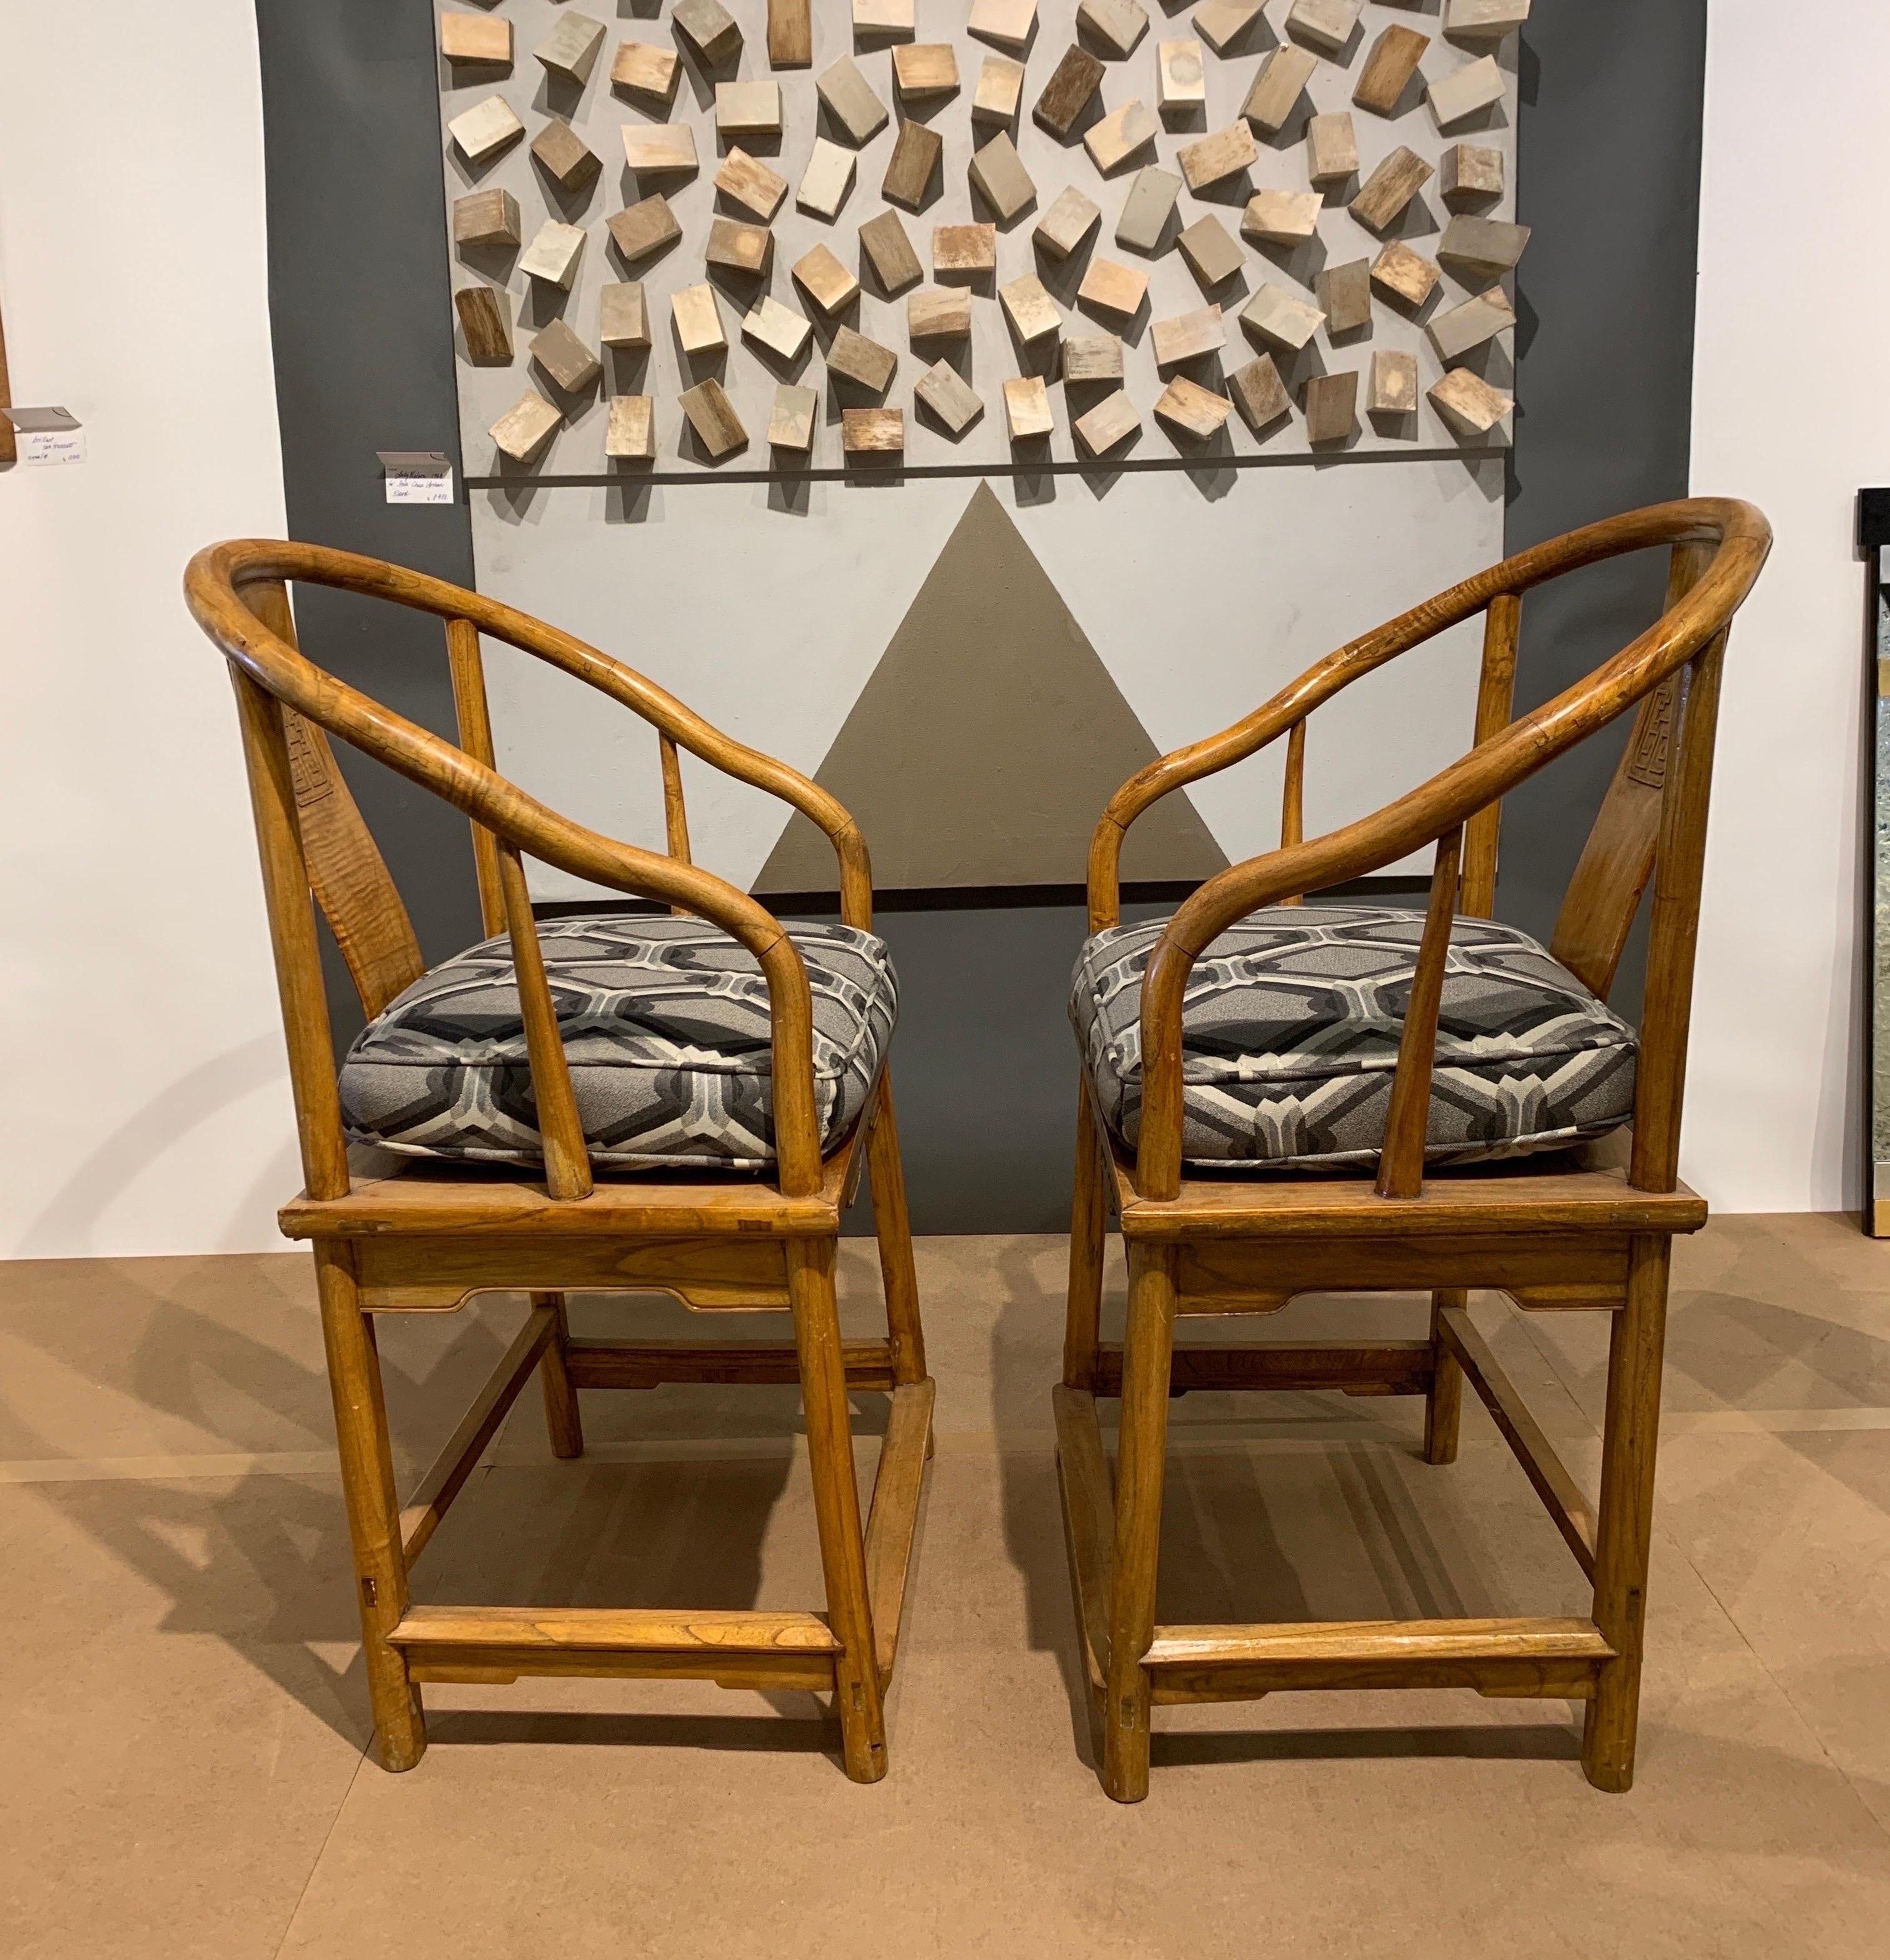 These custom ordered chairs came from a high-end country club estate in Indian Wells California. The entire estate was designed by Sally Sirkin Lewis. We are not sure of the designer or maker of these chairs but they were certainly used to be mixed